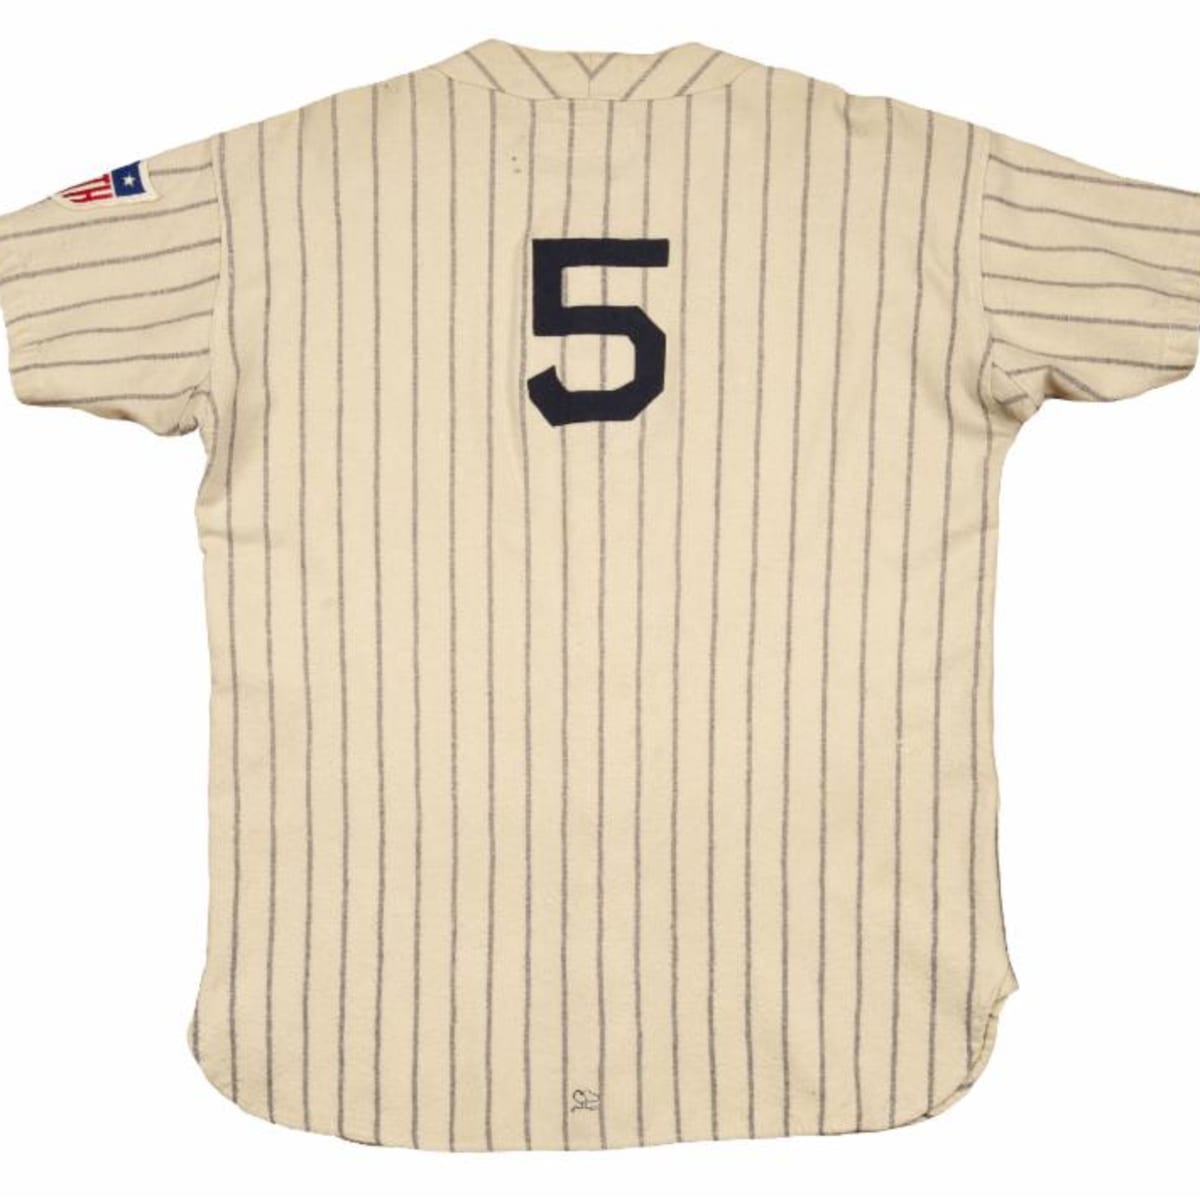 Joe DiMaggio New York Yankees Jersey Number Kit, Authentic Home